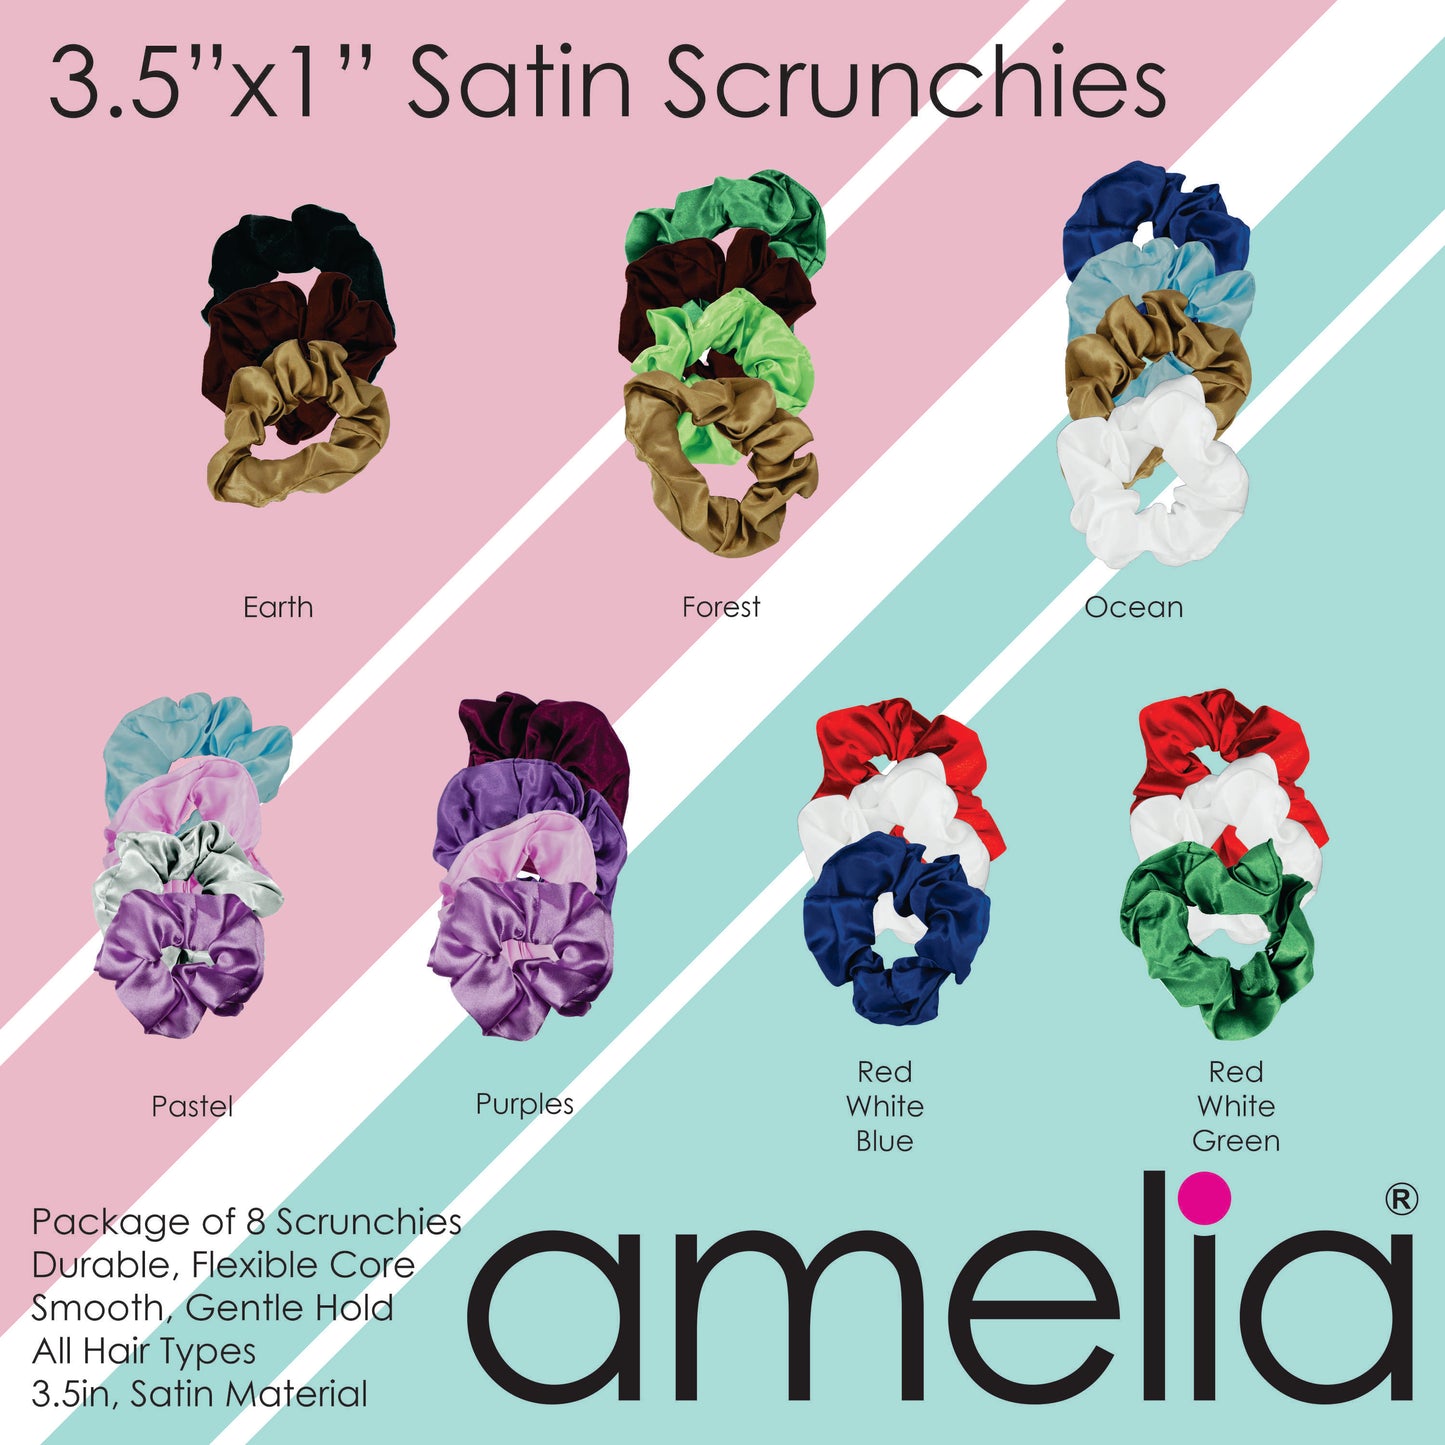 Amelia Beauty, Tan Imitation Silk Scrunchies, 4.5in Diameter, Gentle on Hair, Strong Hold, No Snag, No Dents or Creases. 6 Pack